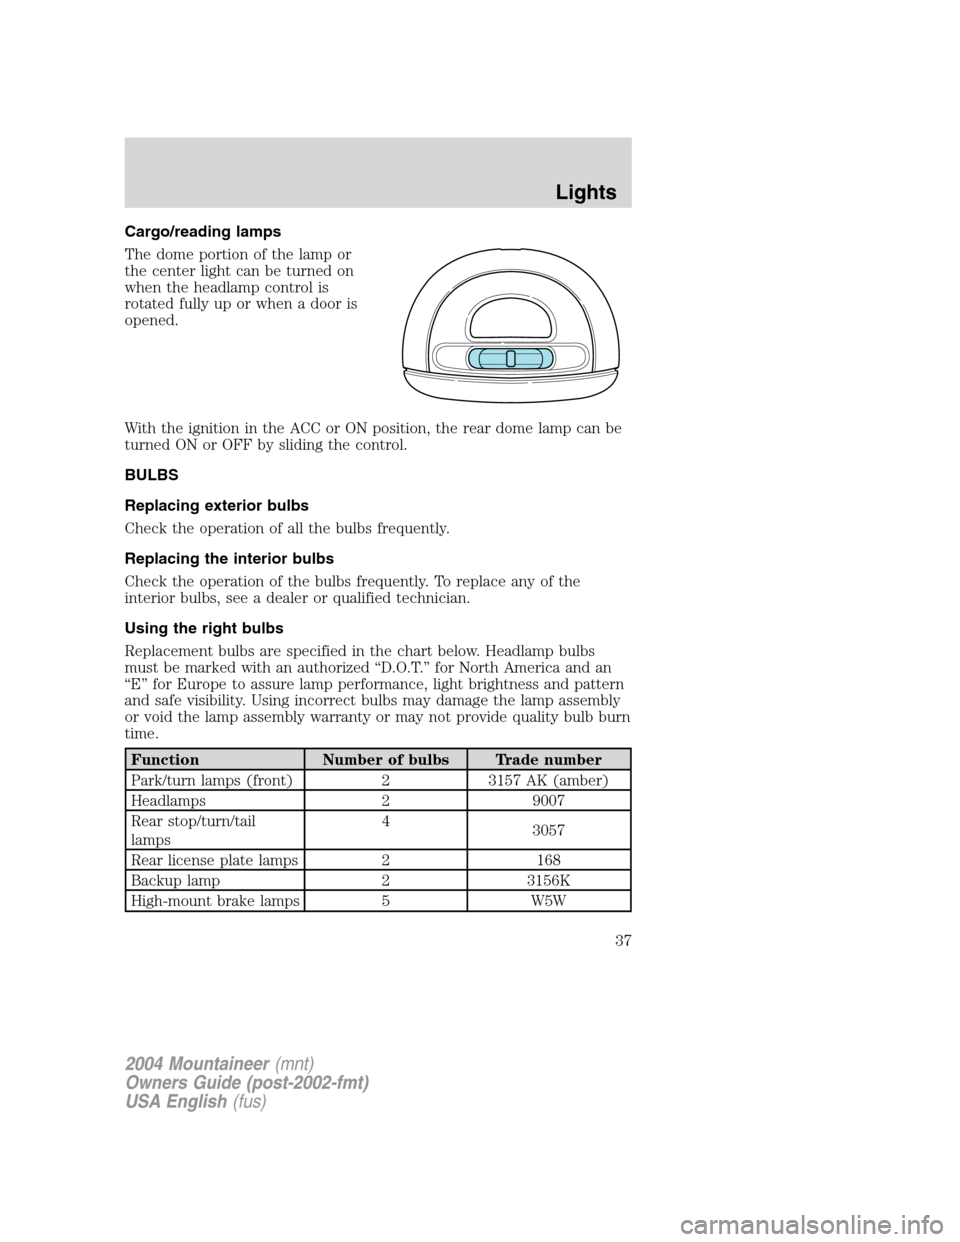 Mercury Mountaineer 2004  Owners Manuals Cargo/reading lamps
The dome portion of the lamp or
the center light can be turned on
when the headlamp control is
rotated fully up or when a door is
opened.
With the ignition in the ACC or ON positio